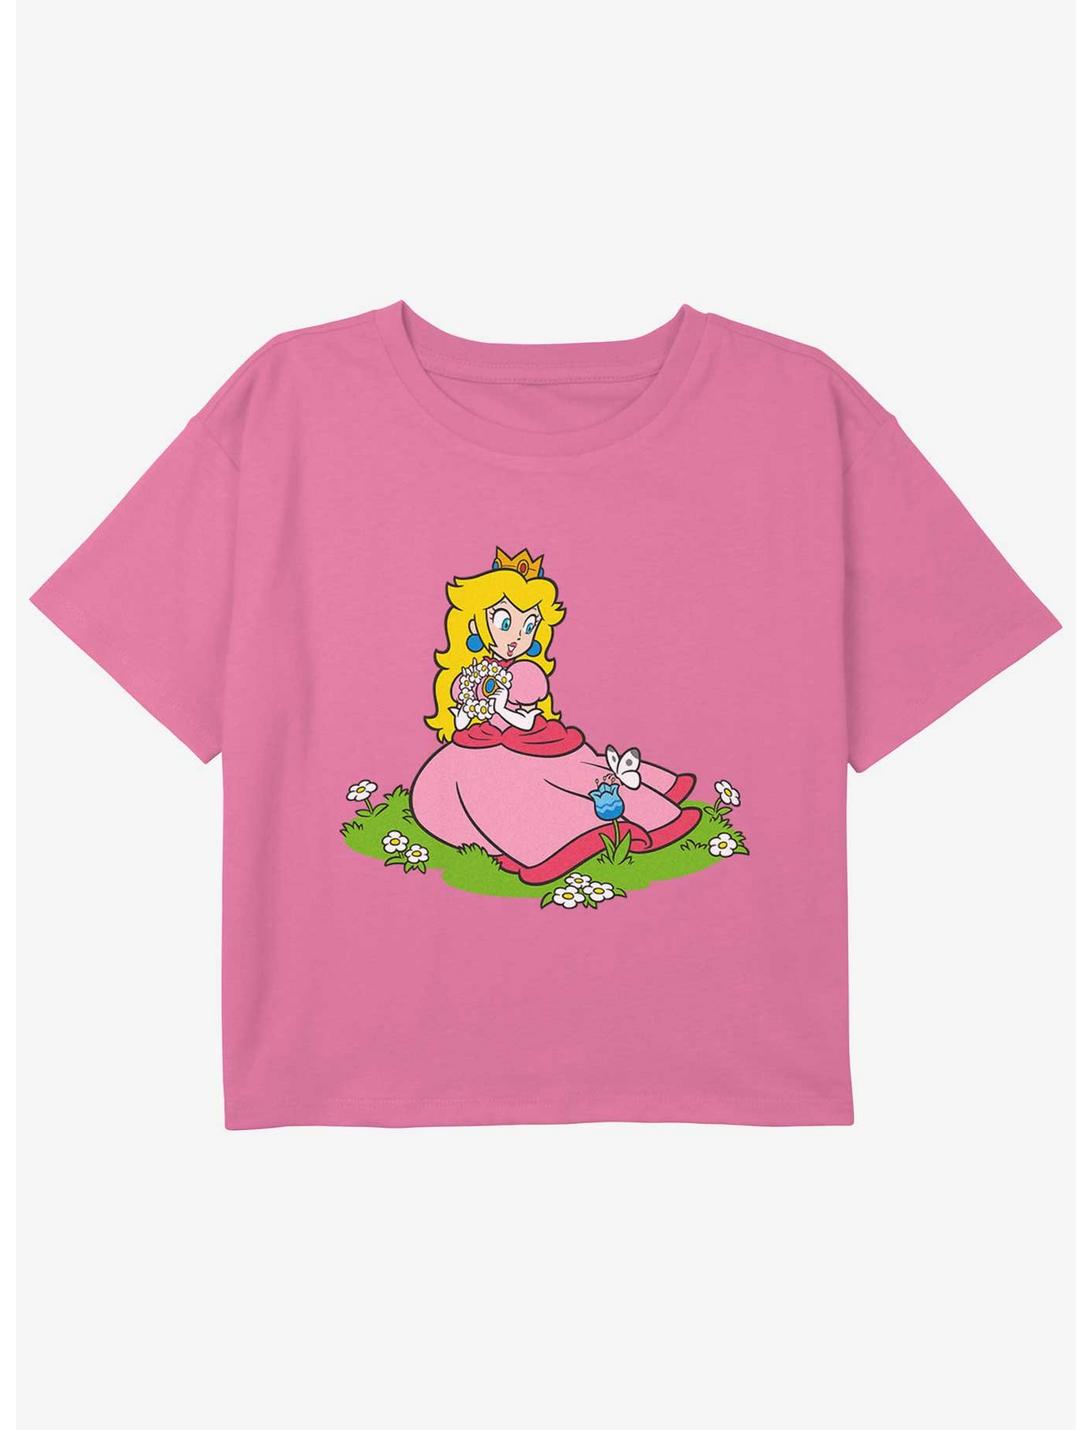 Nintendo Peach And A Butterfly Youth Girls Boxy Crop T-Shirt, PINK, hi-res